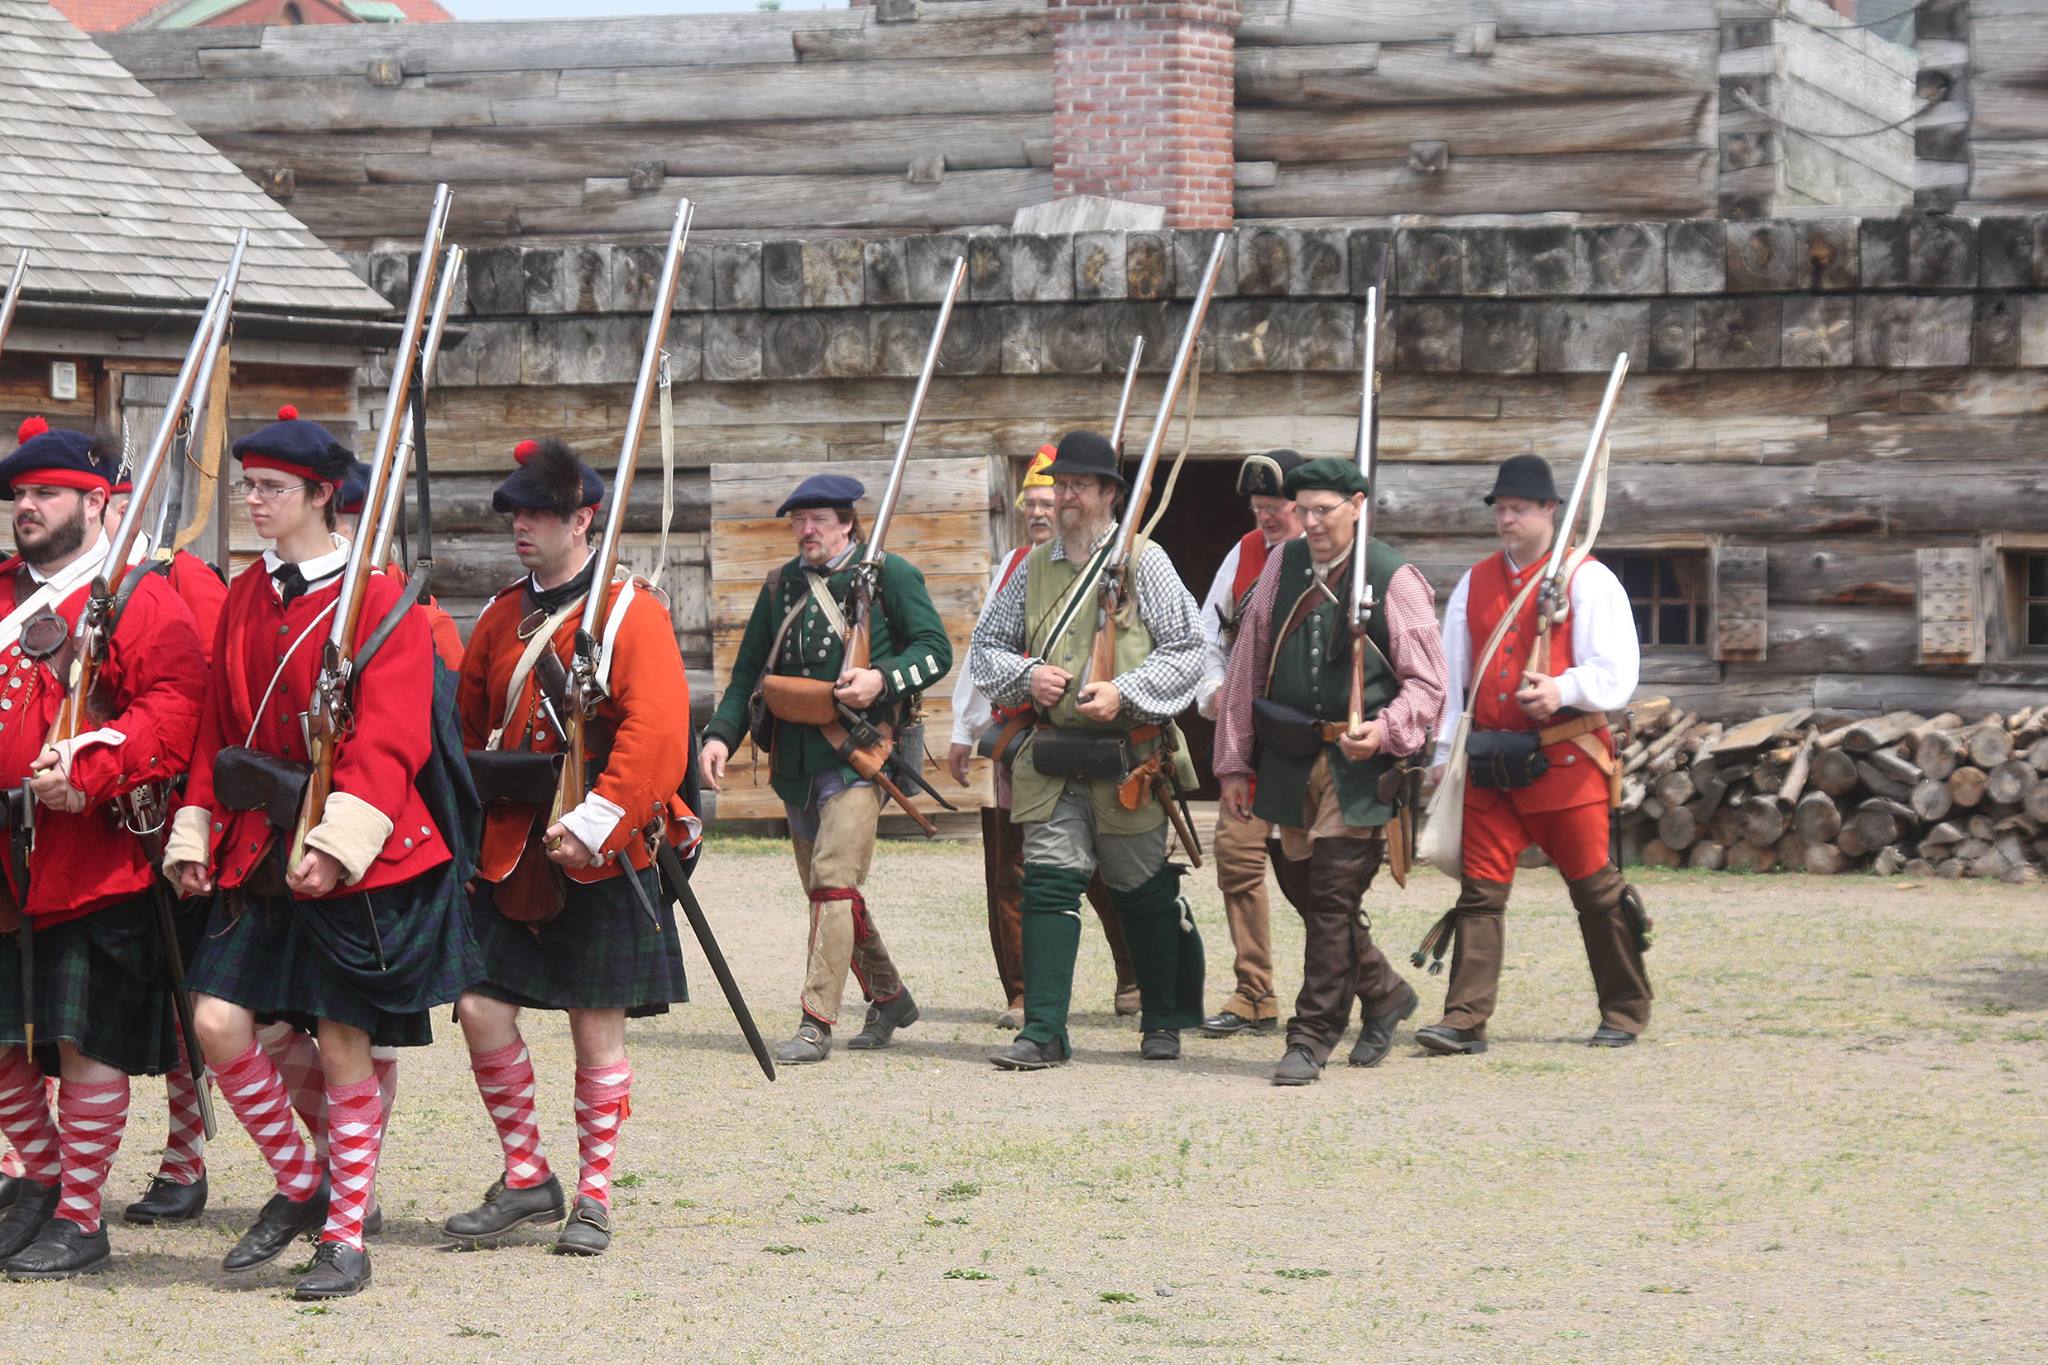 Rows of soldiers marching inside the fort. They are in lines carrying their muskets. 